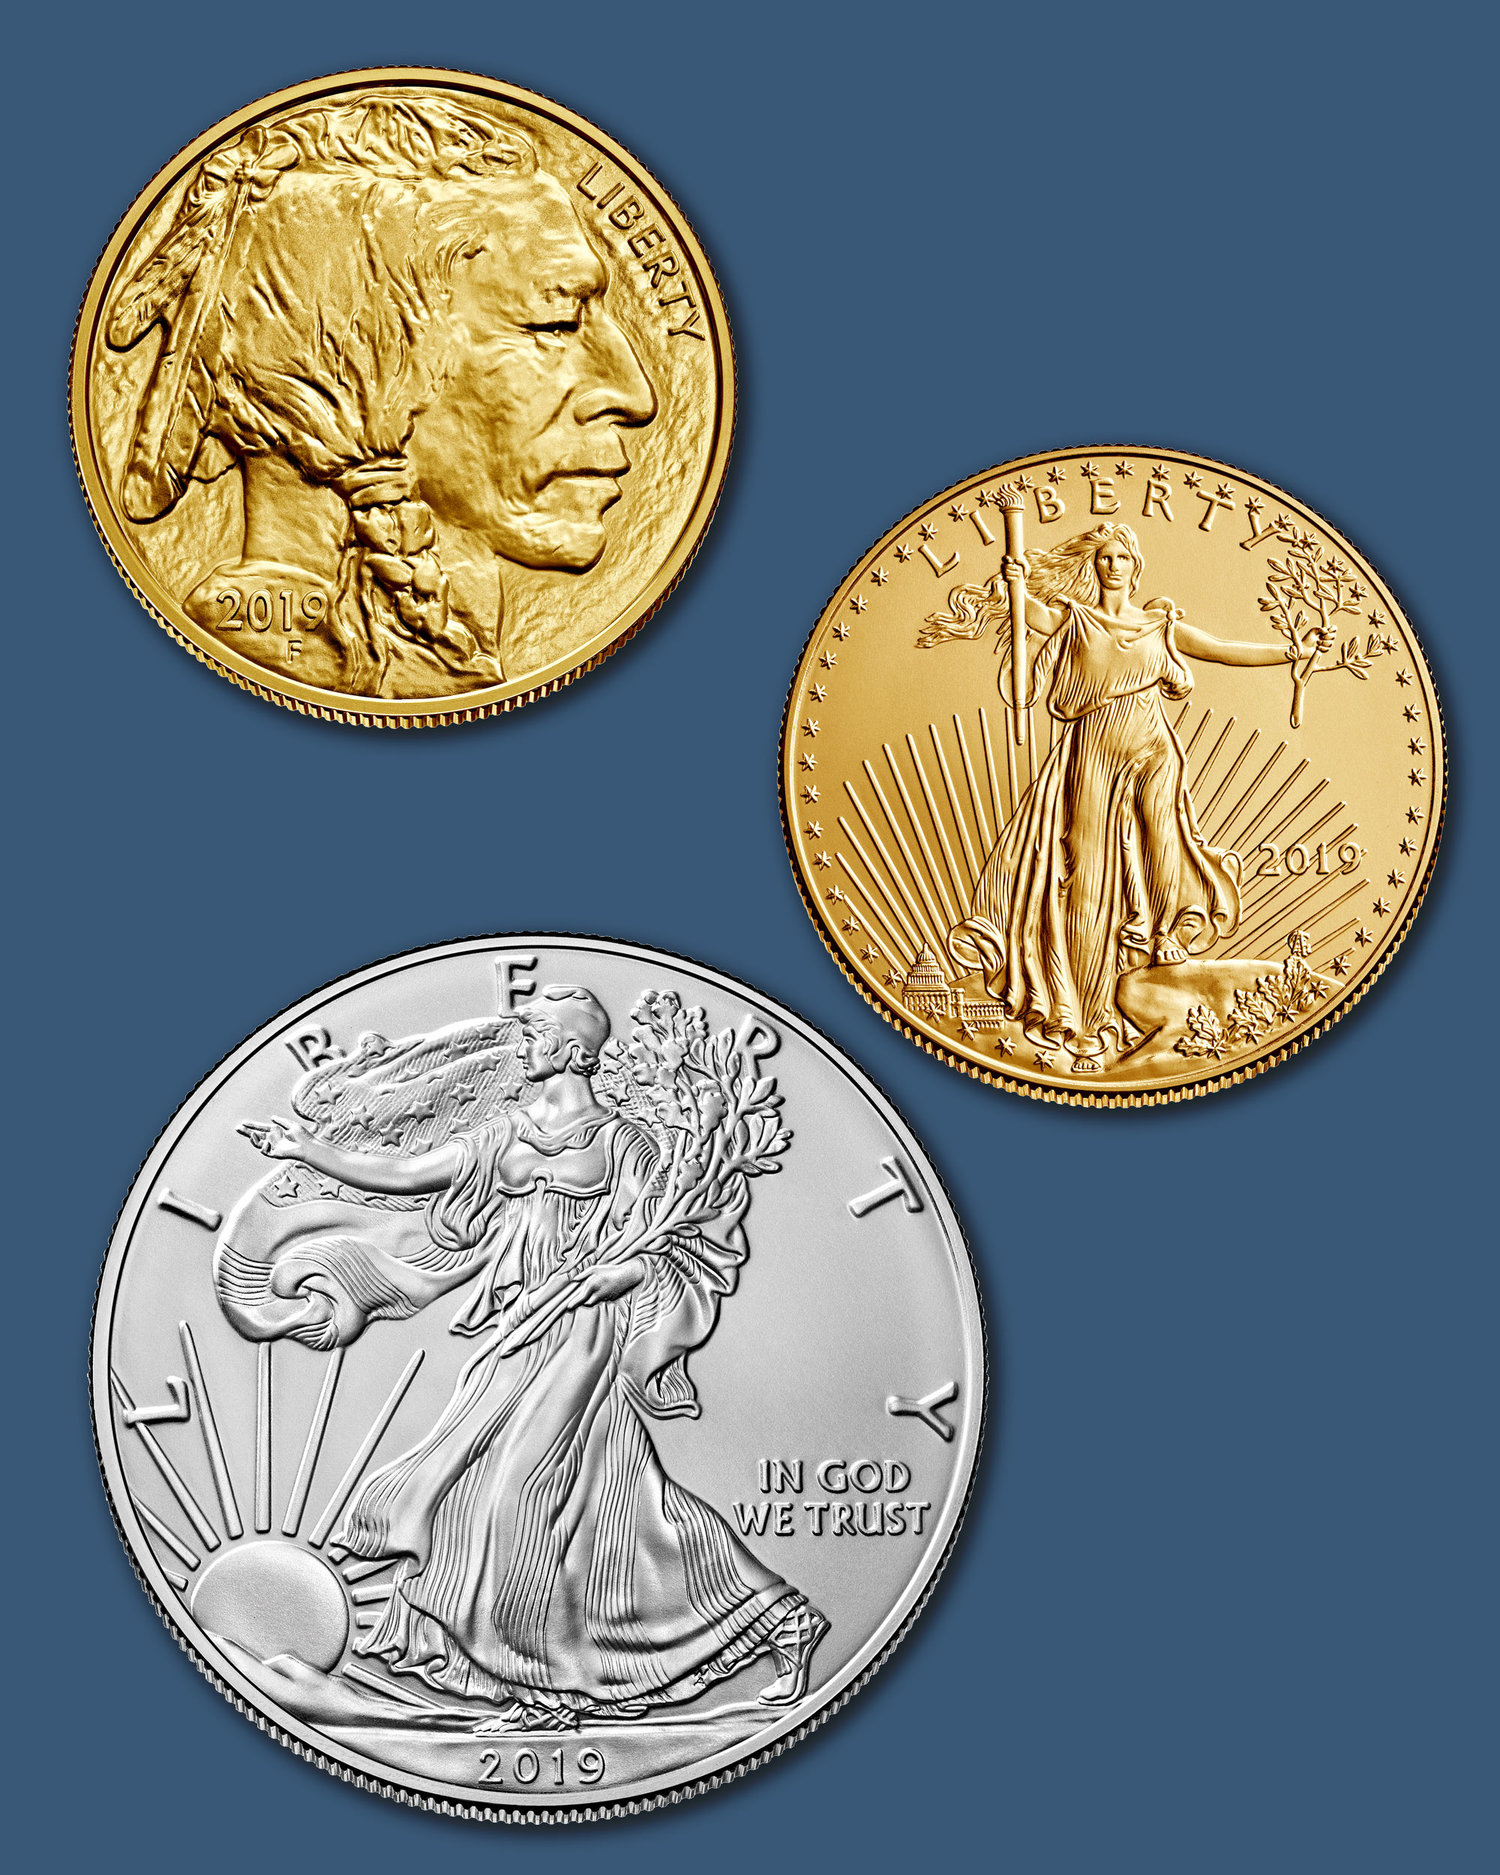 A brief history of the modern American Buffalo gold coin — Mint